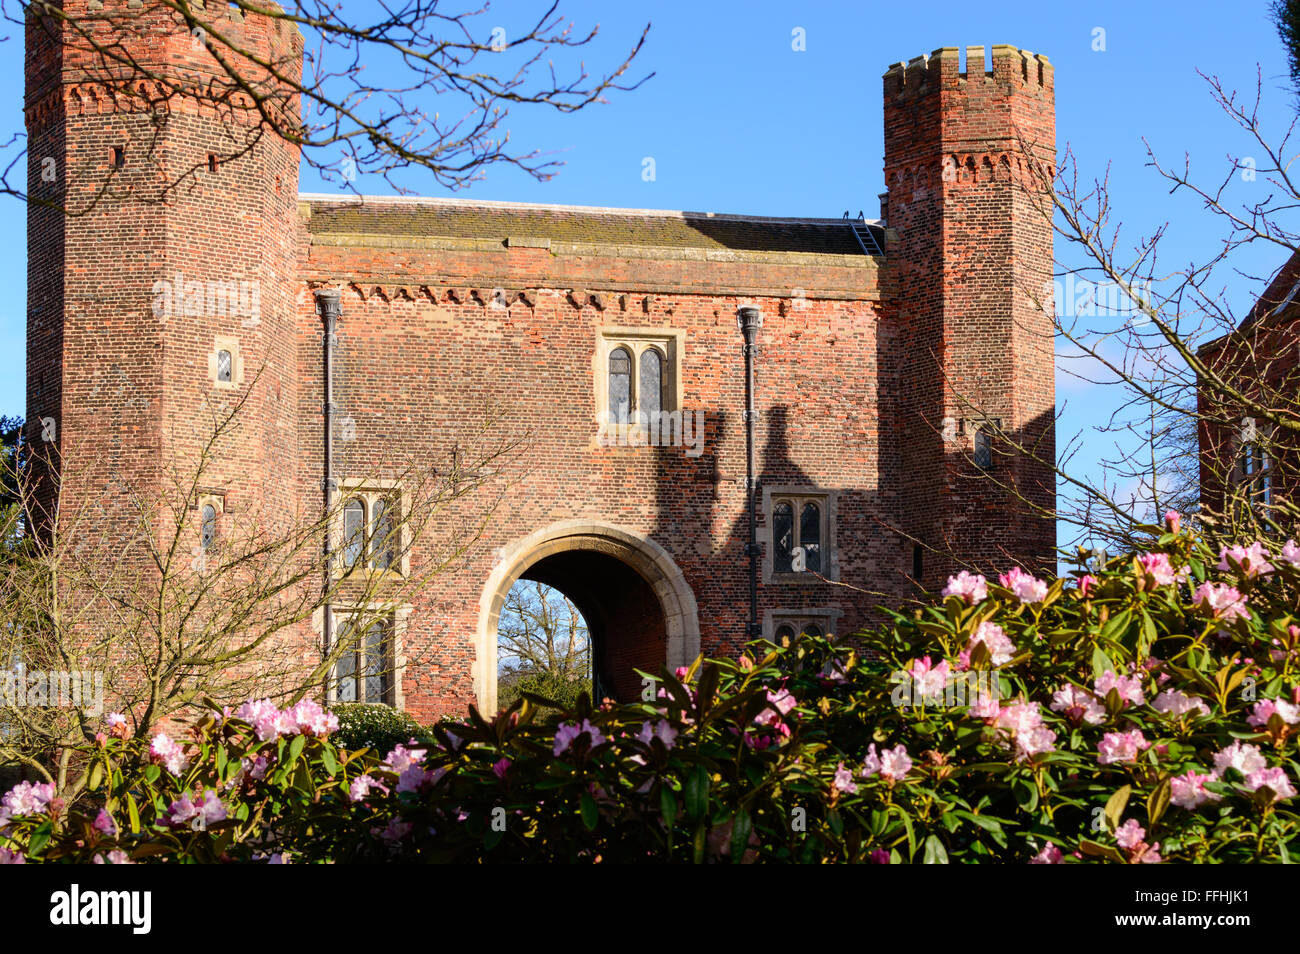 The gatehouse at Hodsock Priory. In Blyth, Worksop, England. On 7th February 2016. Stock Photo